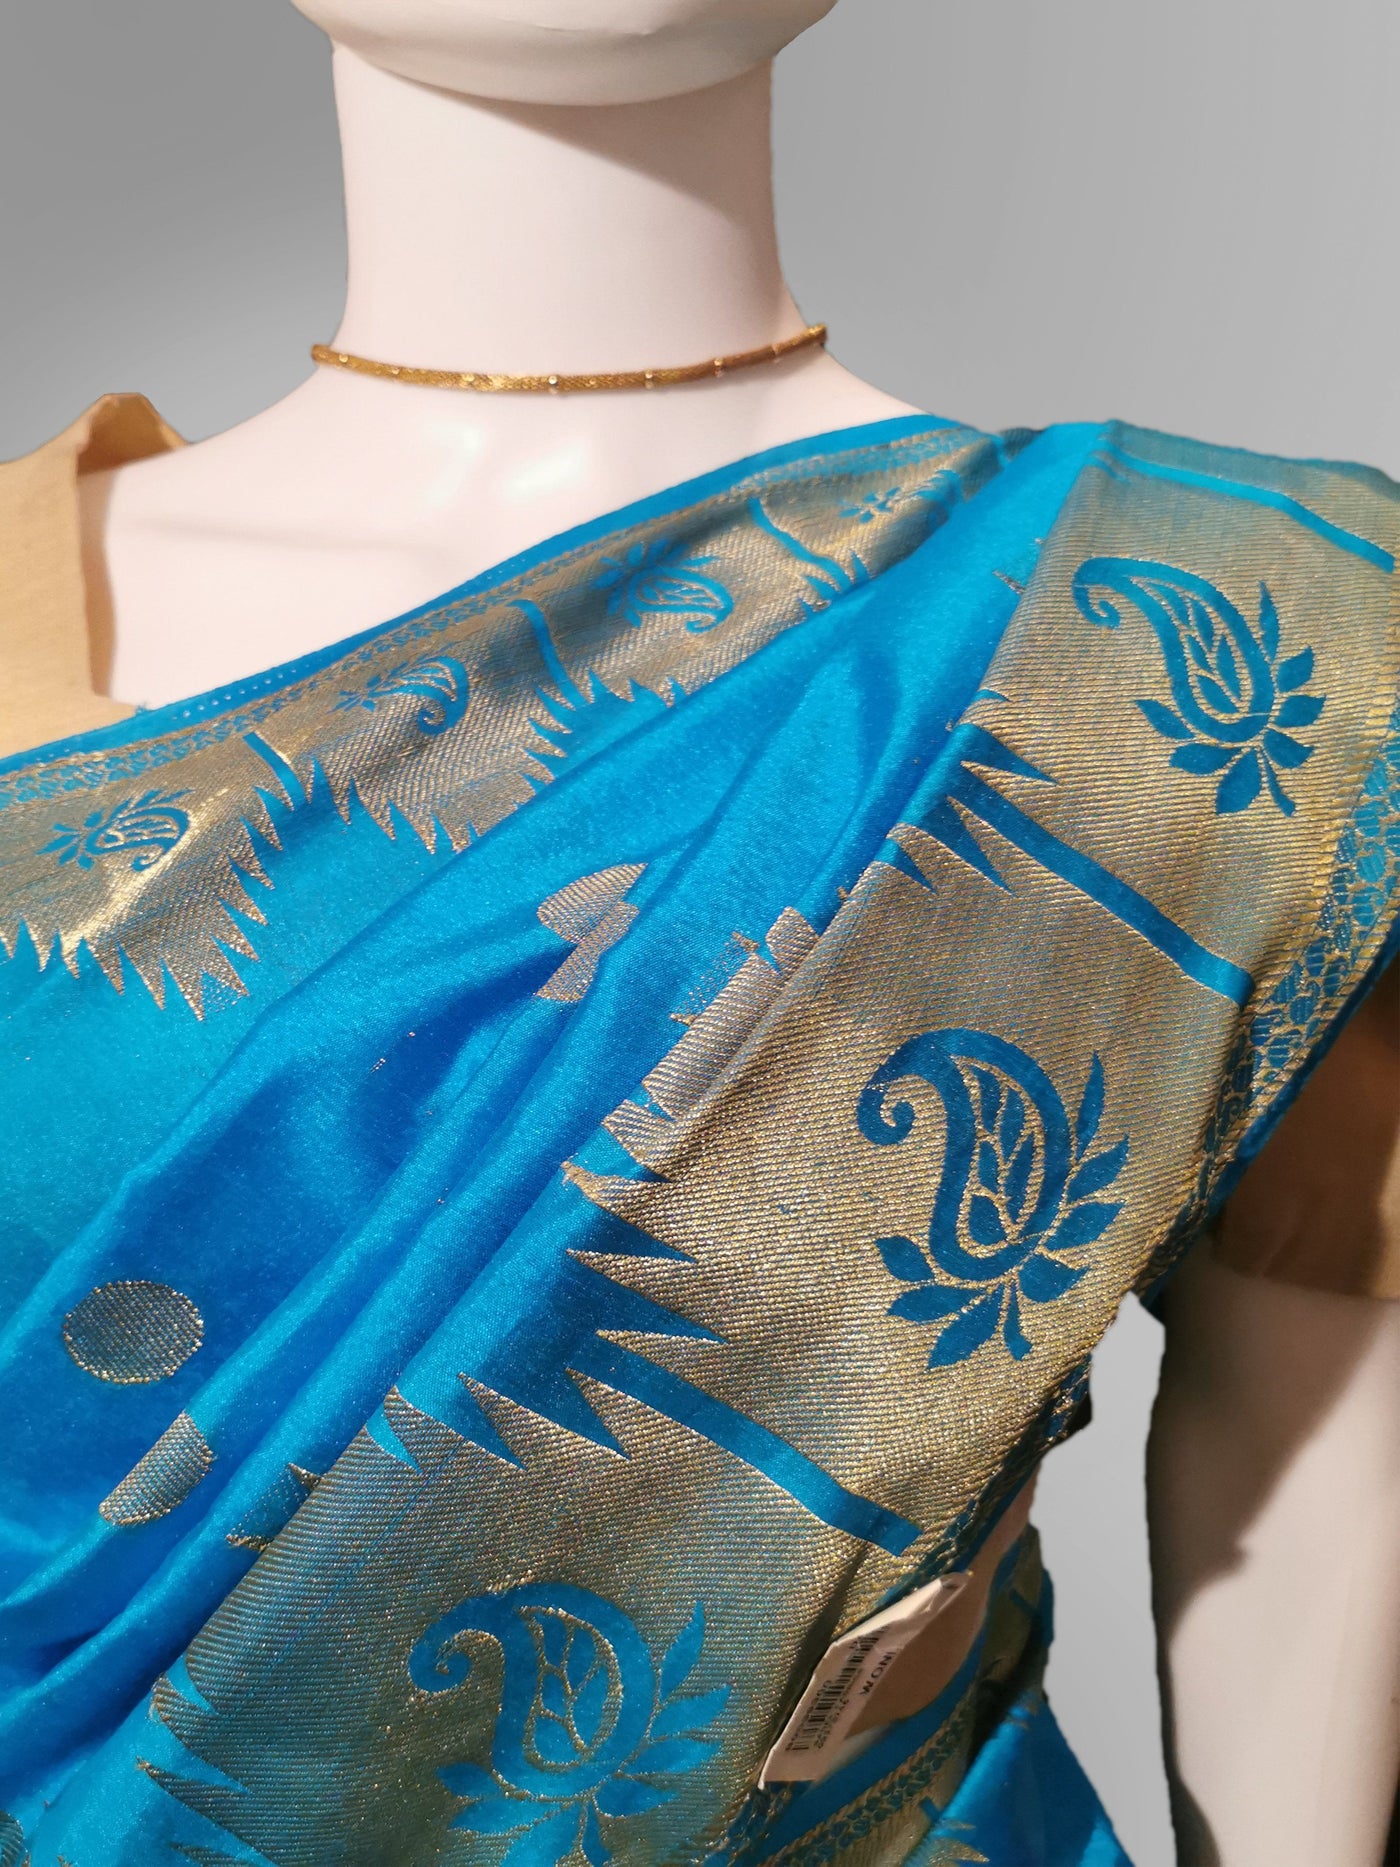 Vibrant Blue Saree Indian Clothing in Denver, CO, Aurora, CO, Boulder, CO, Fort Collins, CO, Colorado Springs, CO, Parker, CO, Highlands Ranch, CO, Cherry Creek, CO, Centennial, CO, and Longmont, CO. NATIONWIDE SHIPPING USA- India Fashion X